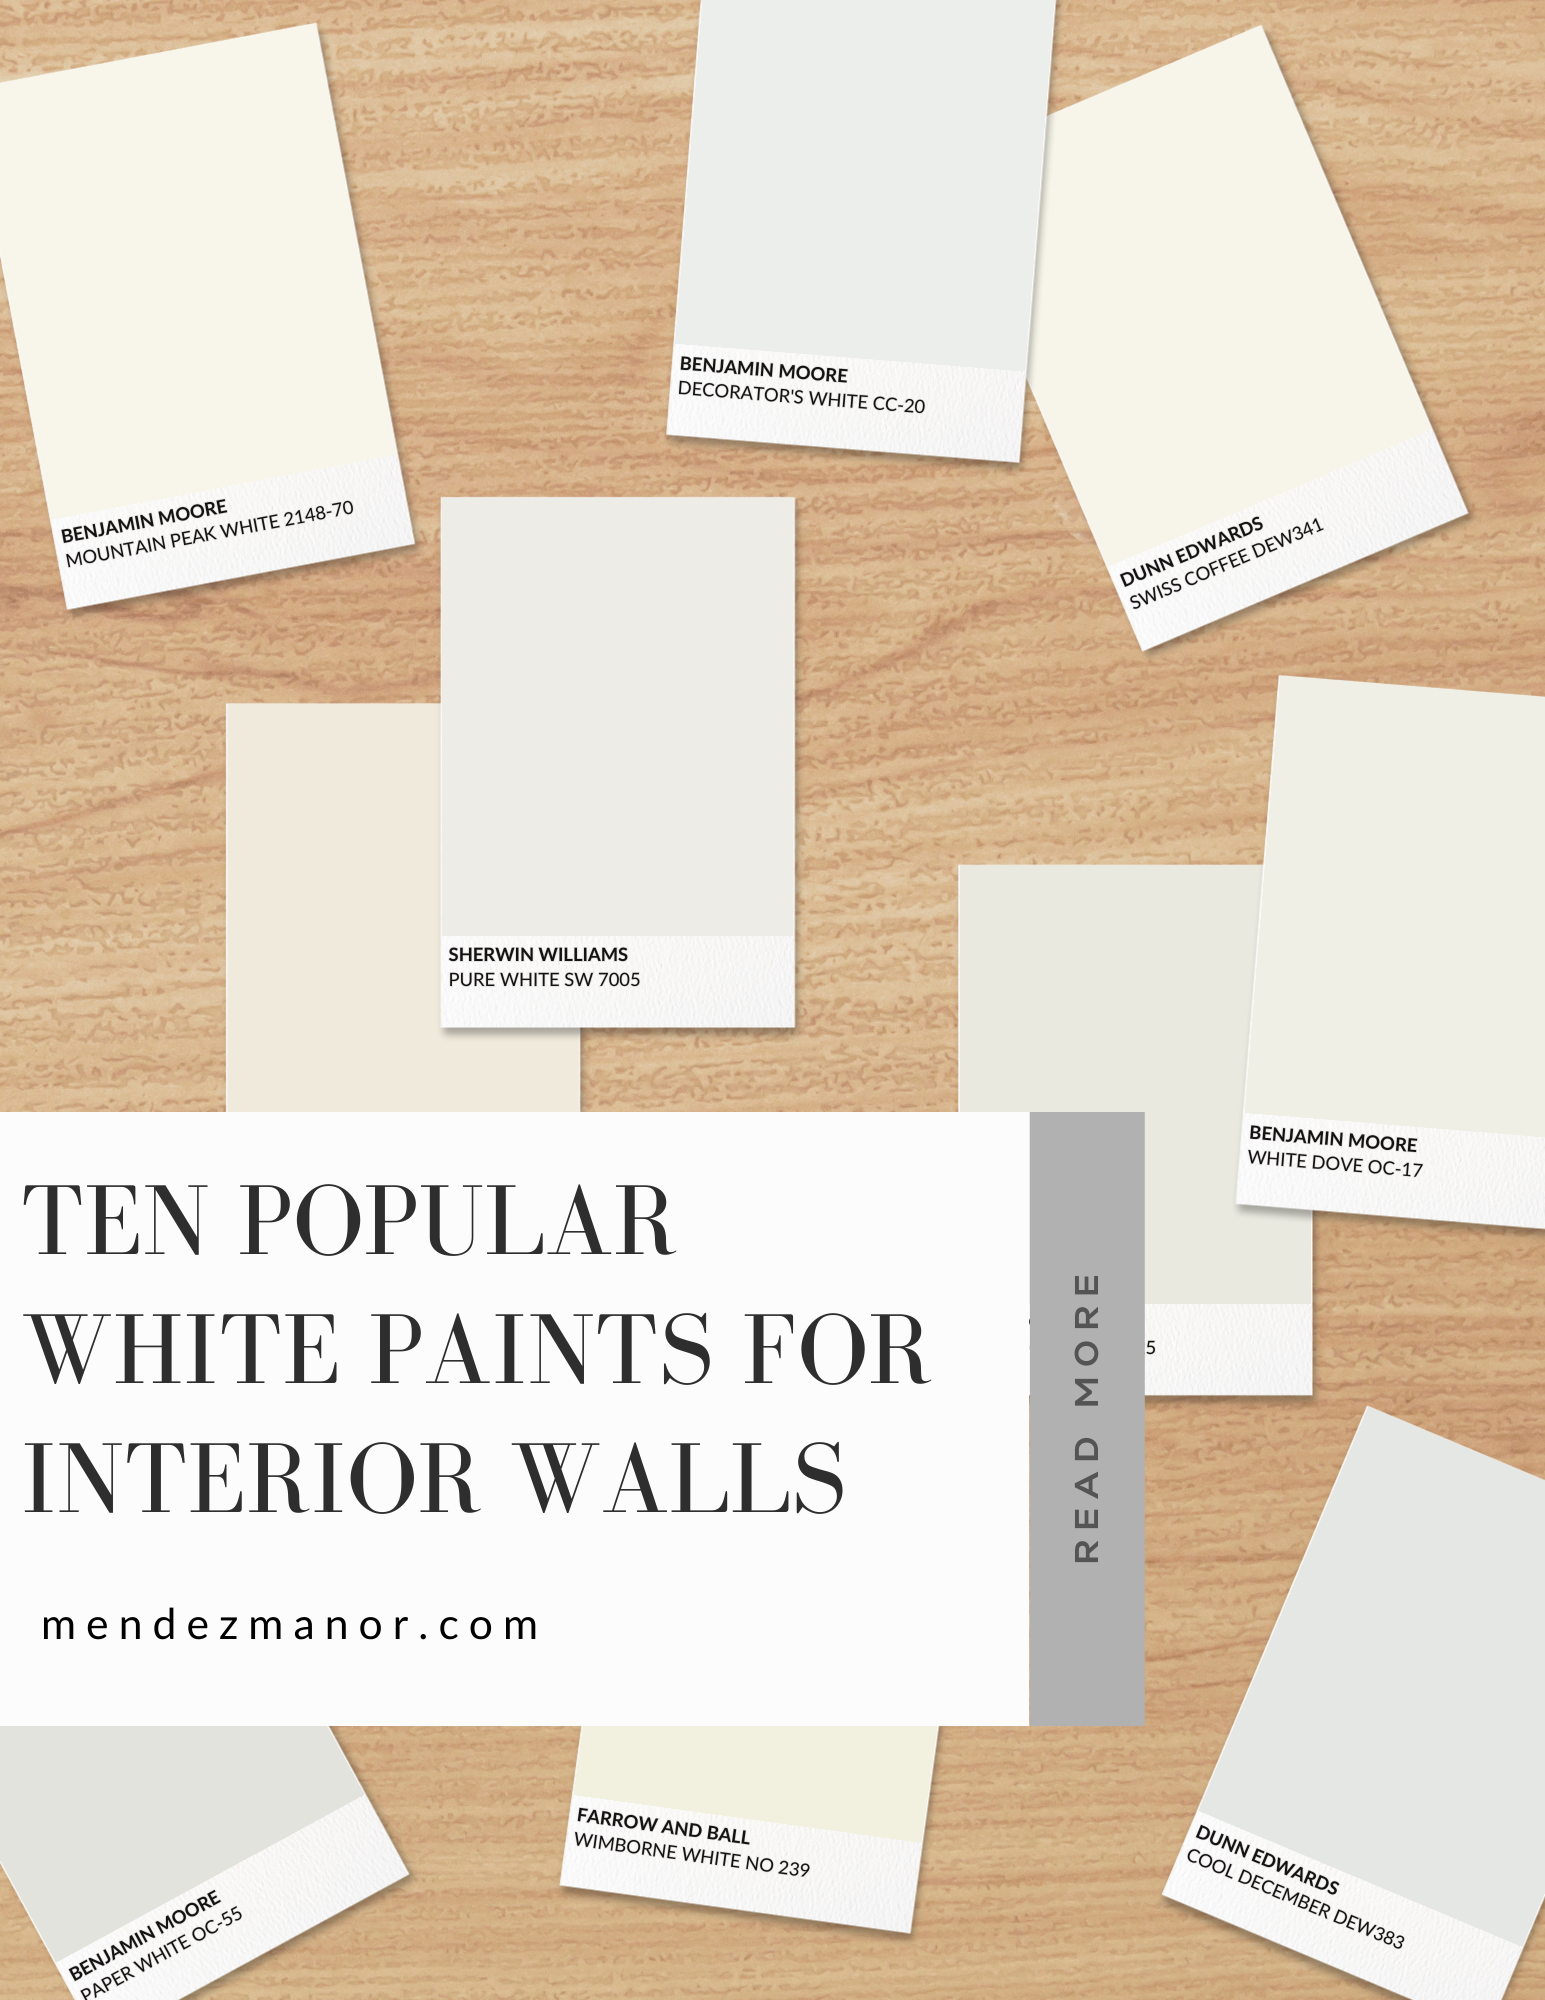 Ten Popular White Paint Colors for Interior Walls